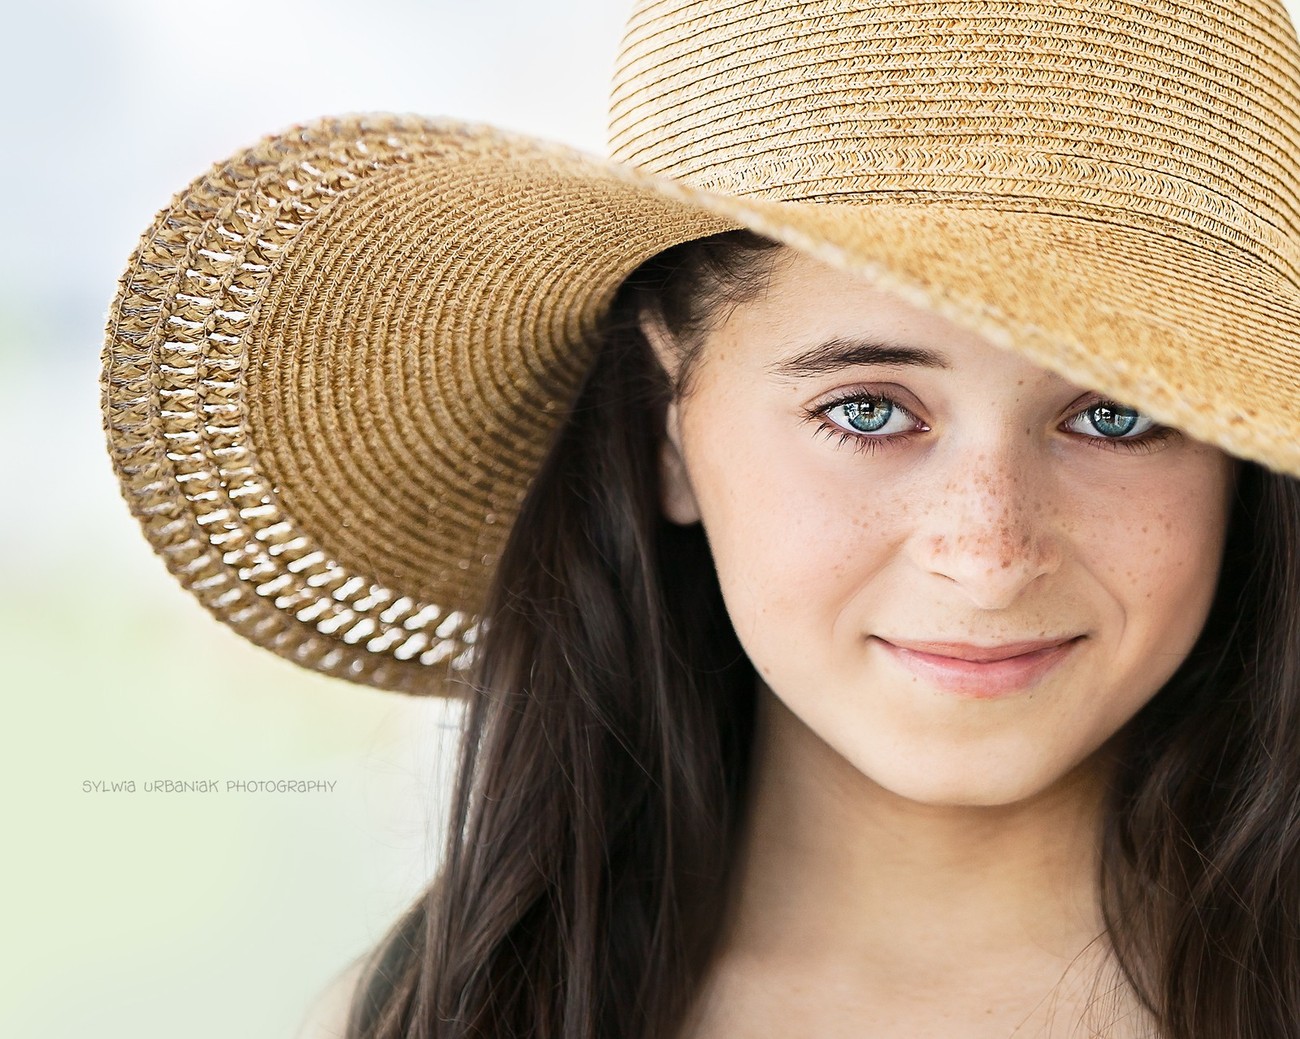 Summer Portraits: Photo Contest Winners Announced